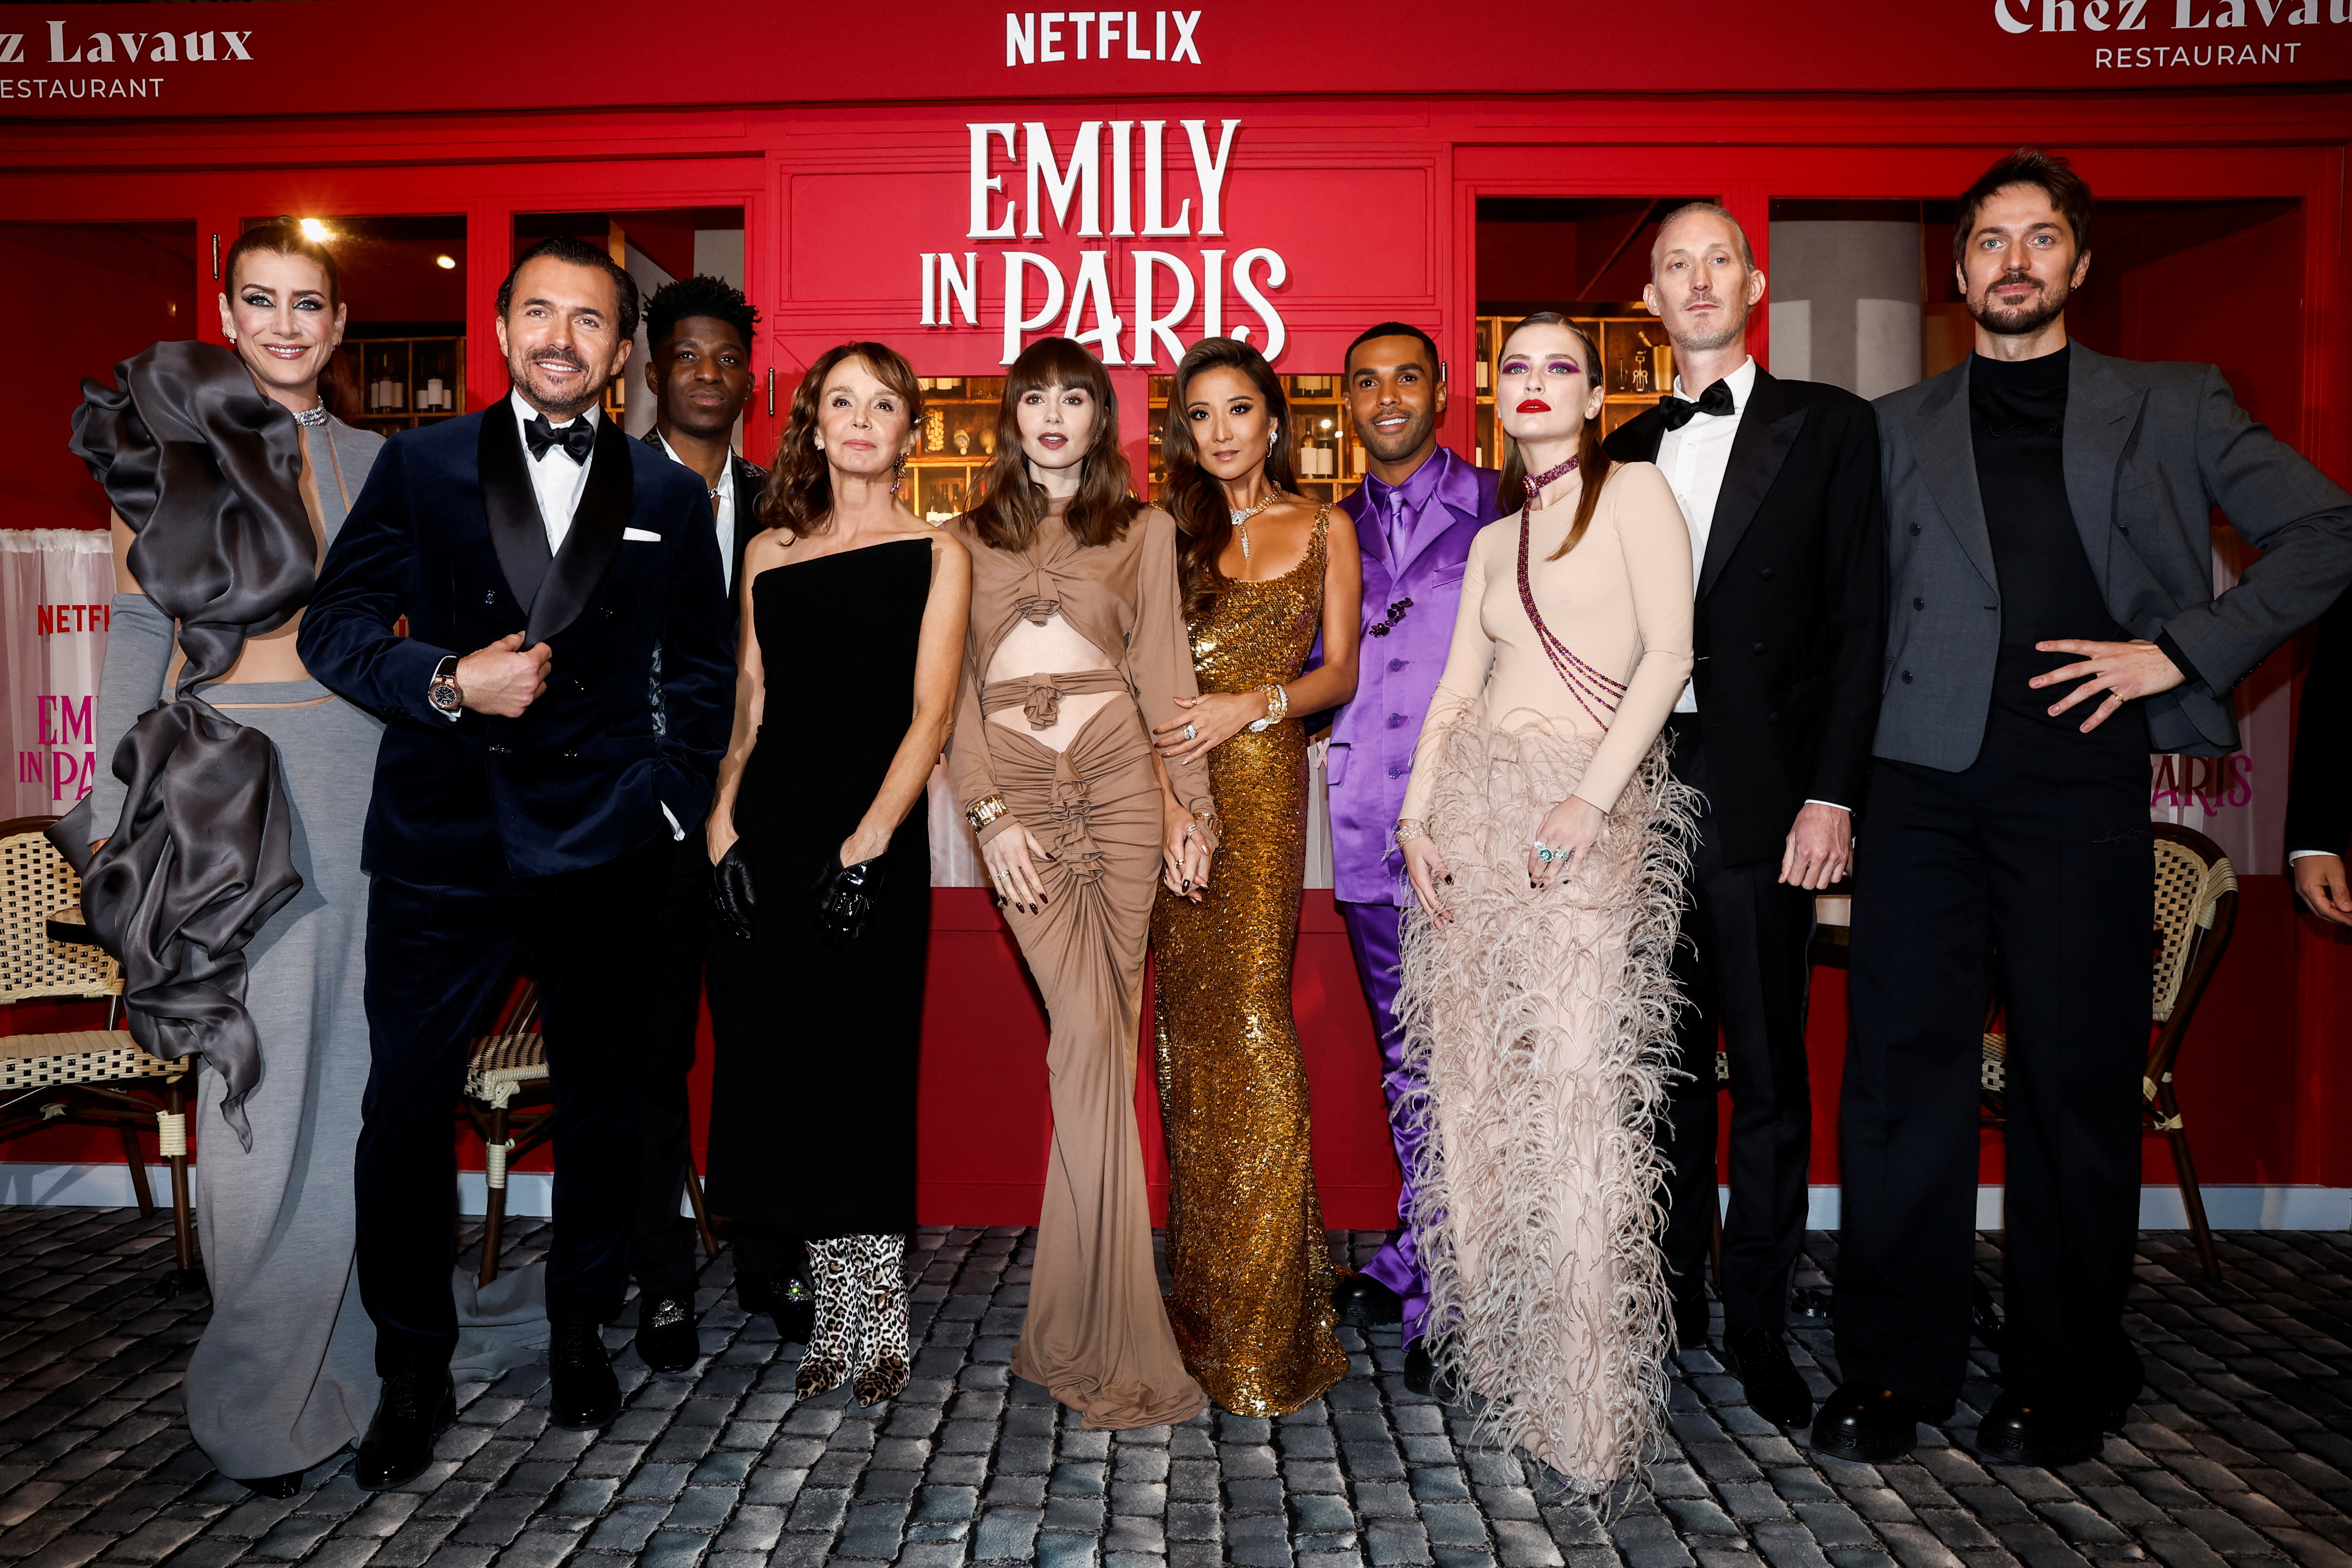 Netflix hit 'Emily in Paris' draws cast to French capital for